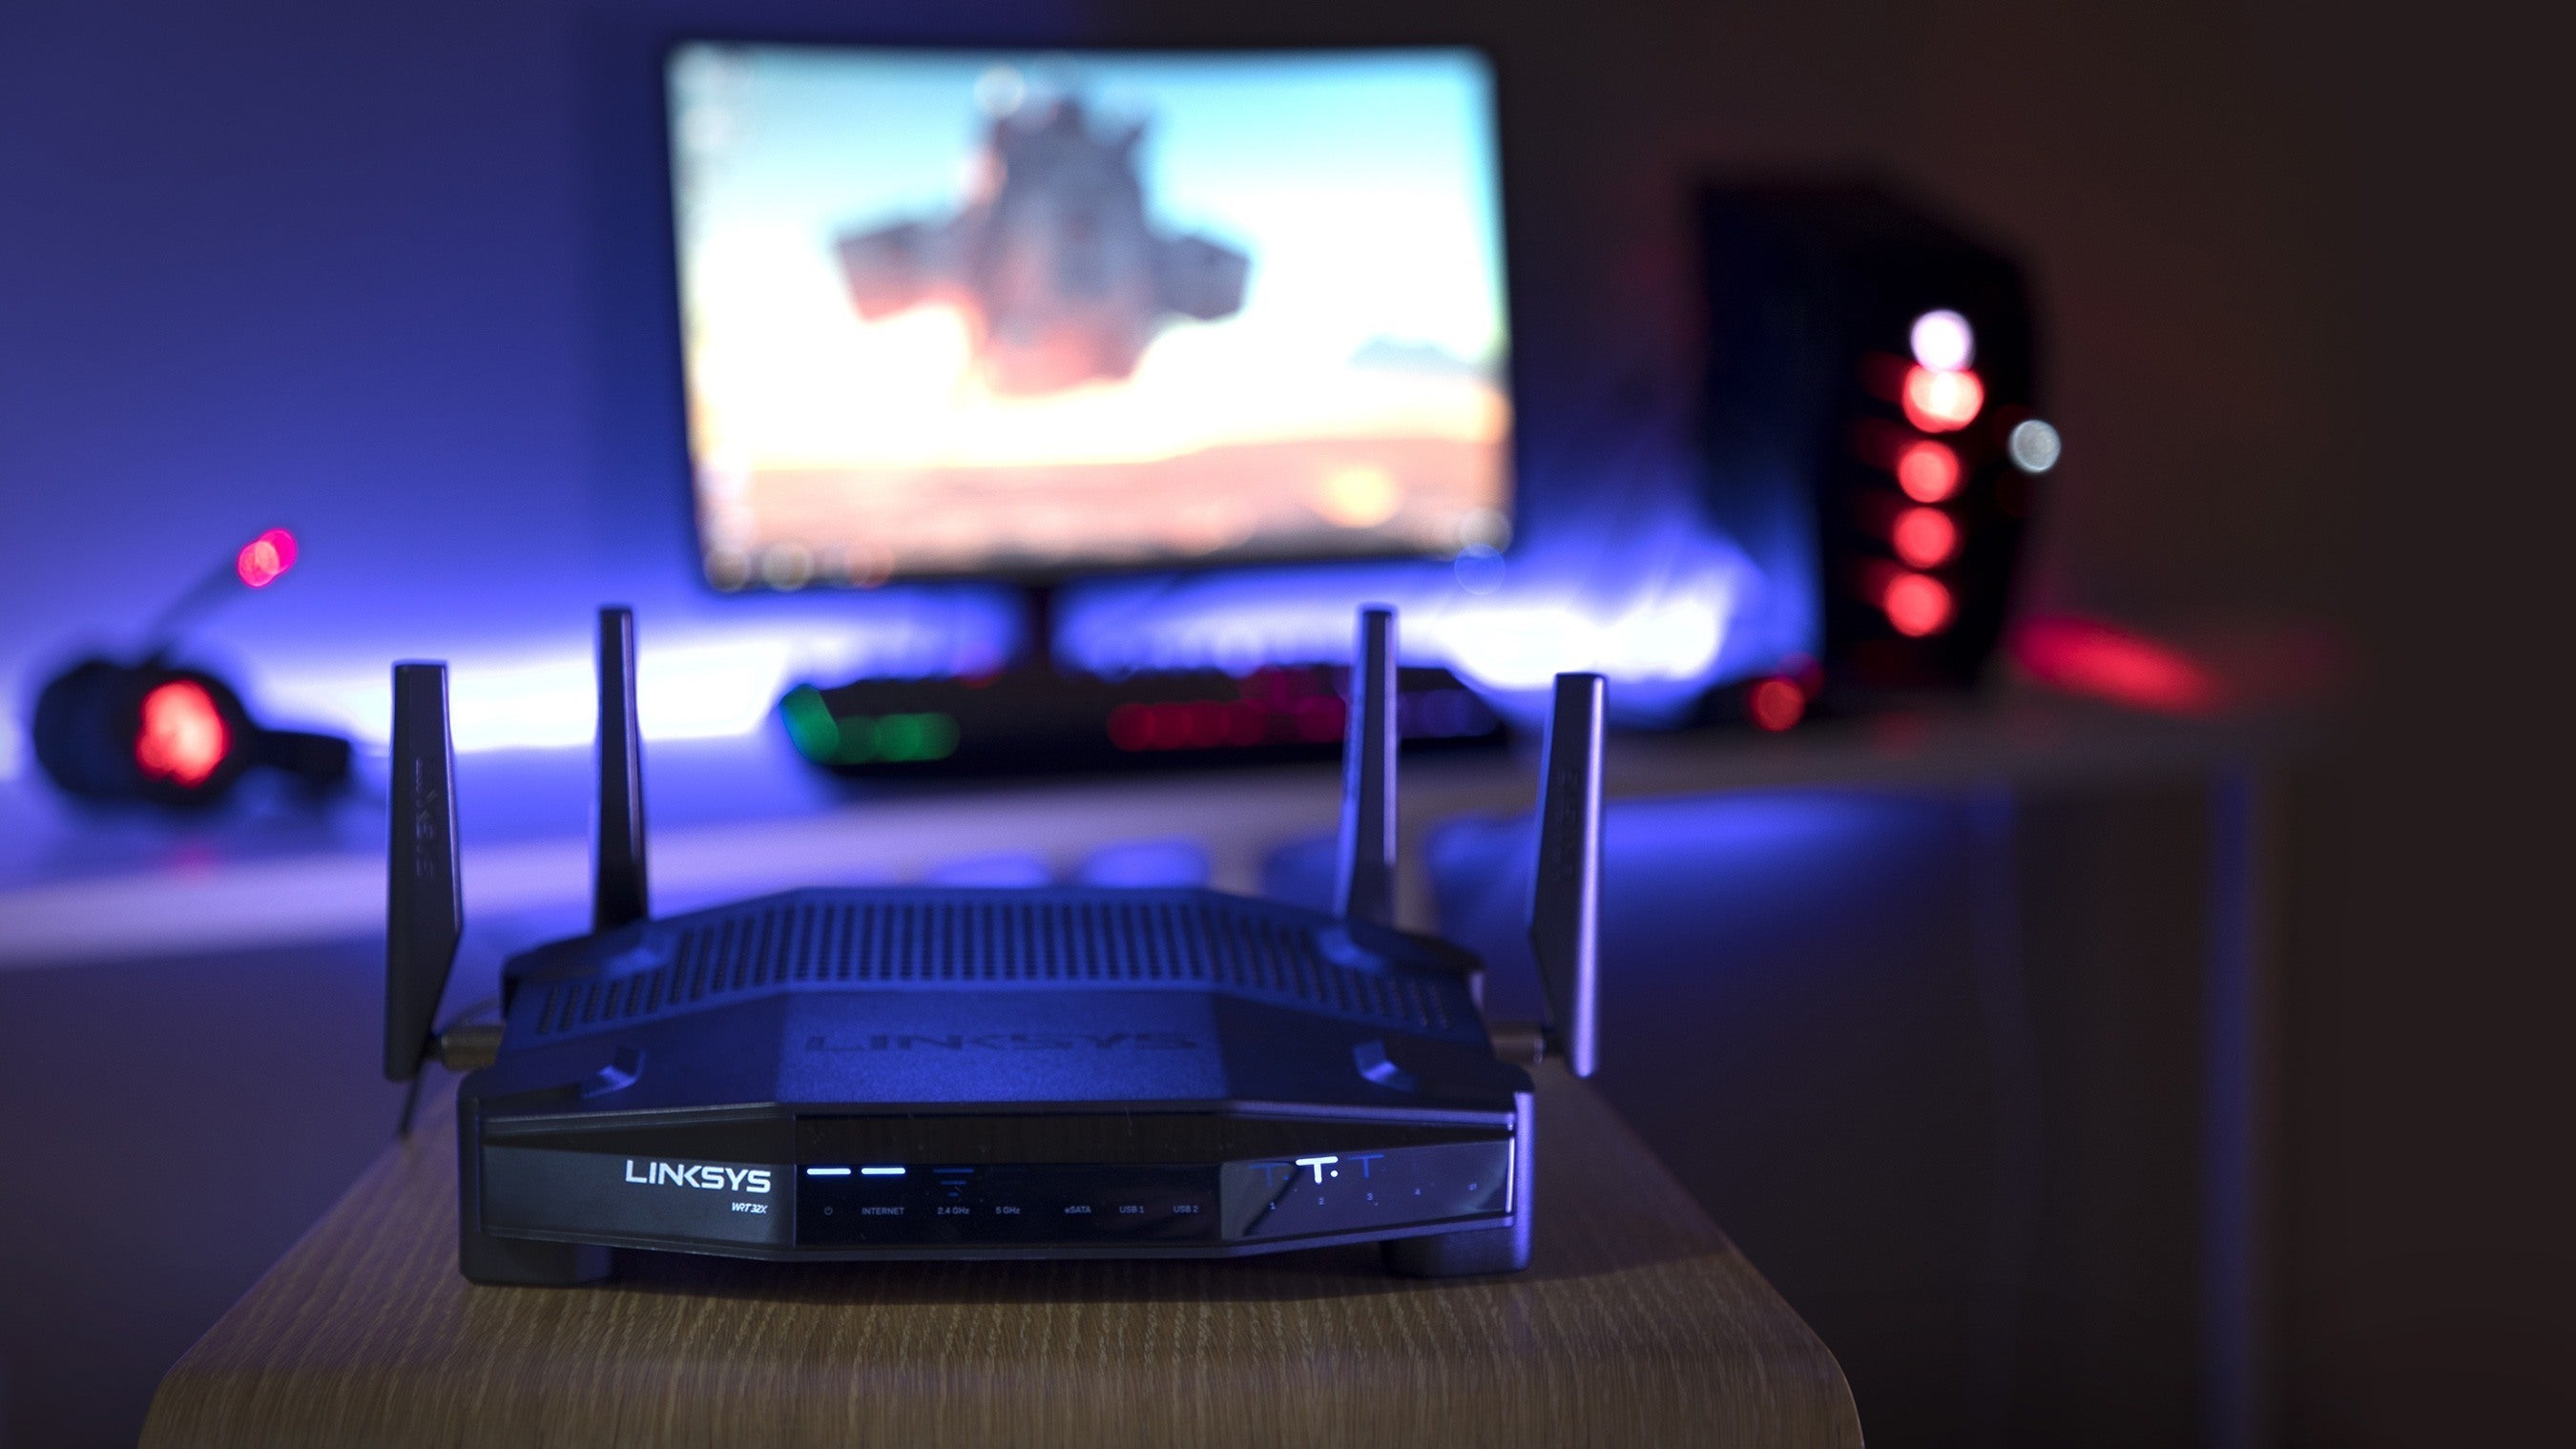 How To Hack Wi-Fi Router